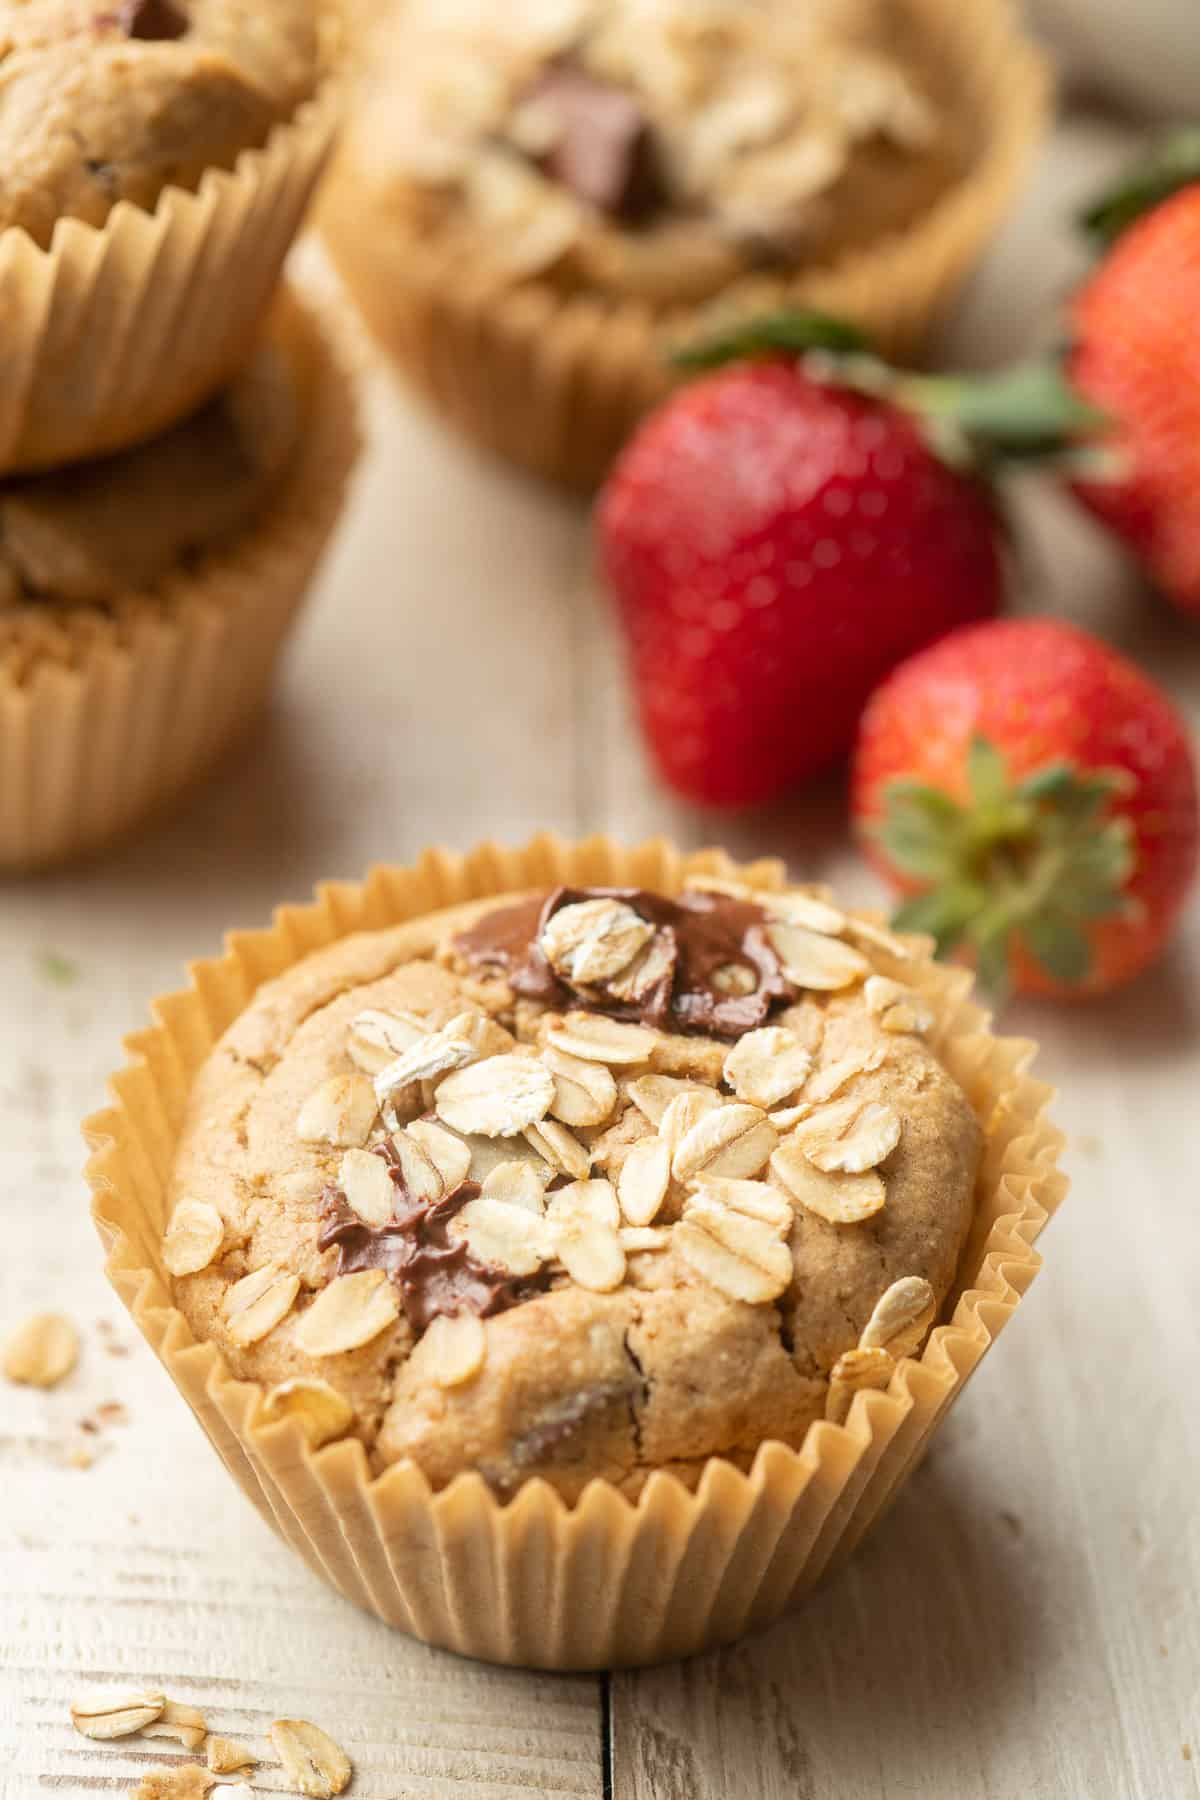 Chocolate Chip Oat Flour Muffins and strawberries on a white wooden surface.